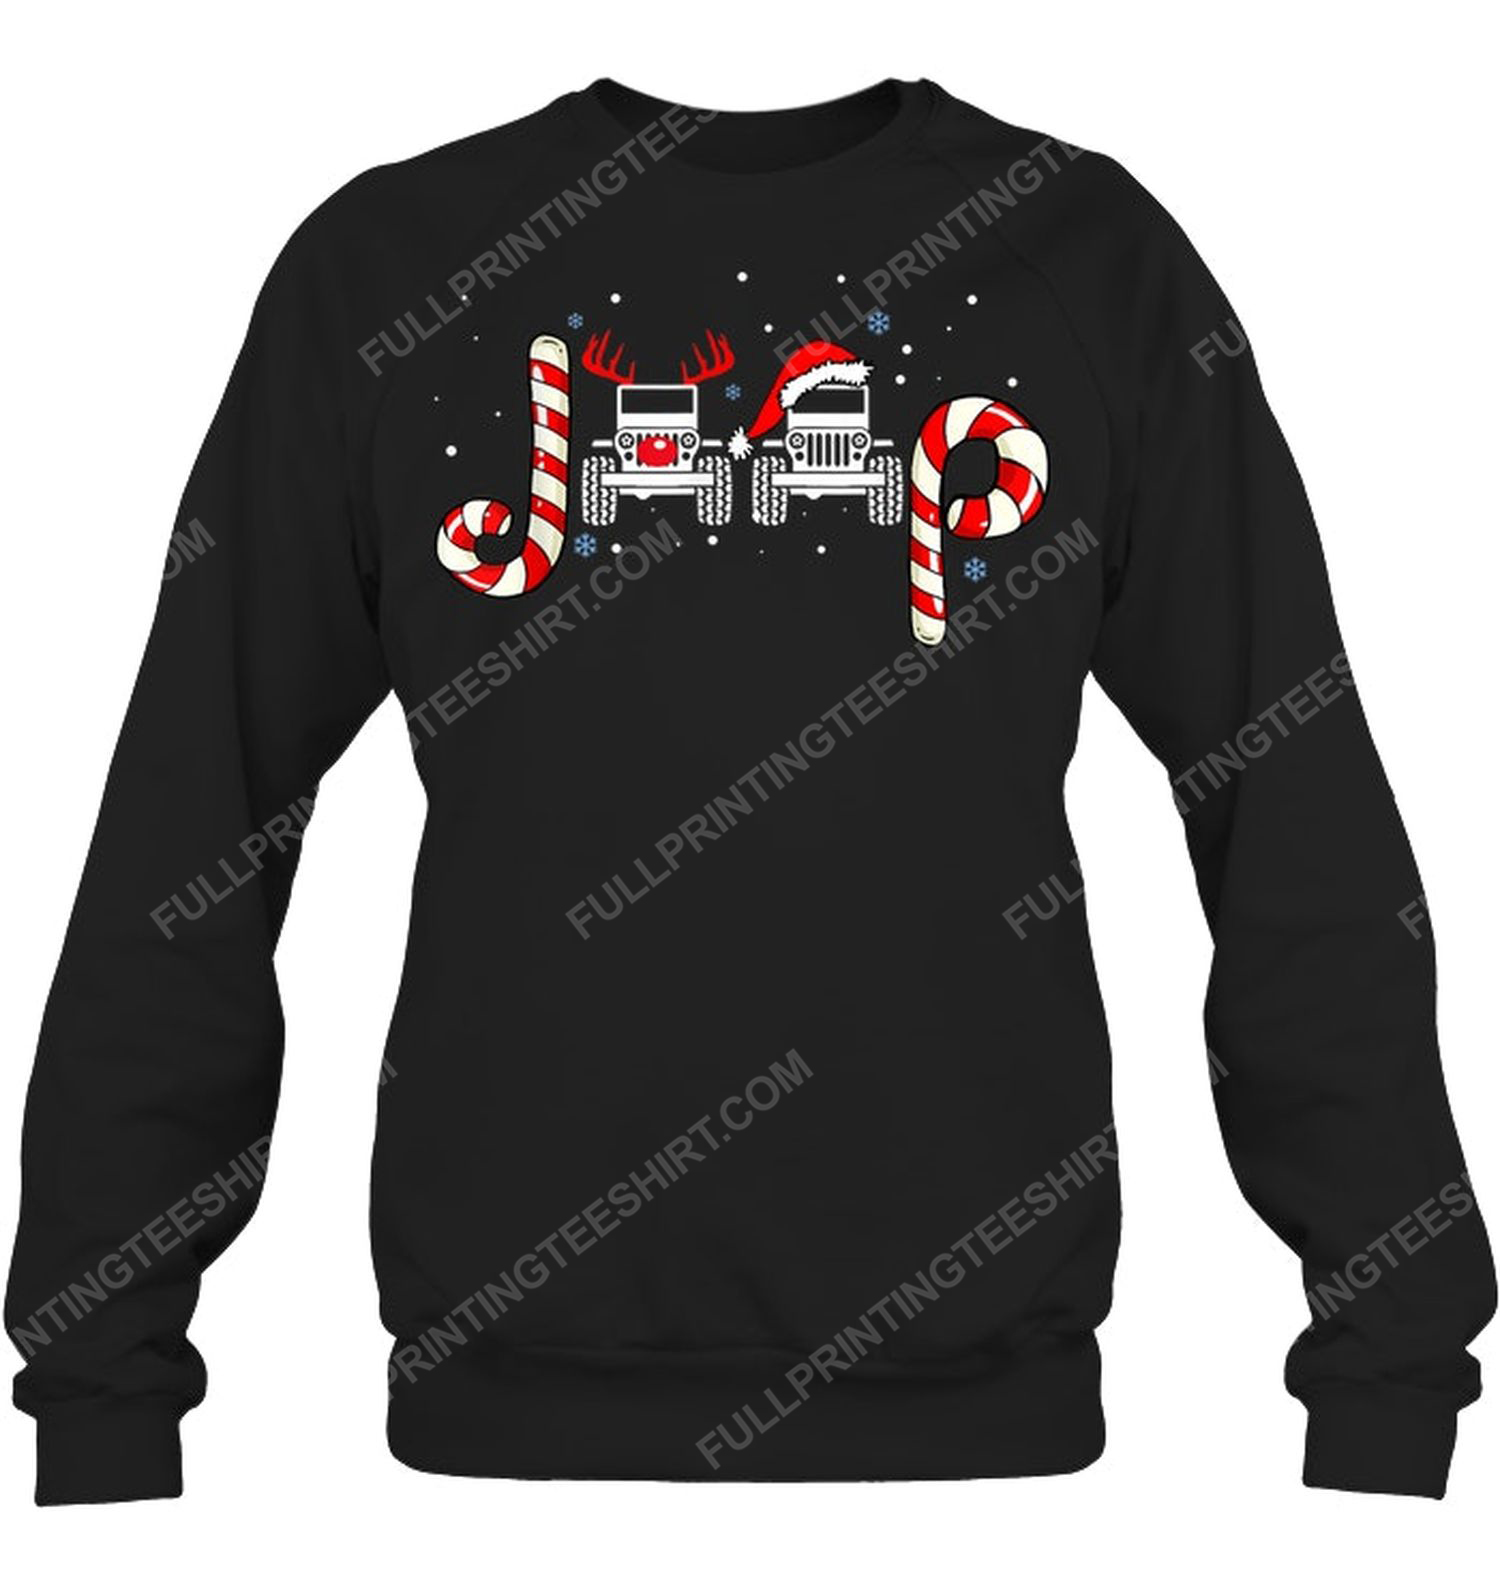 Christmas time jeep car and candy cane sweatshirt